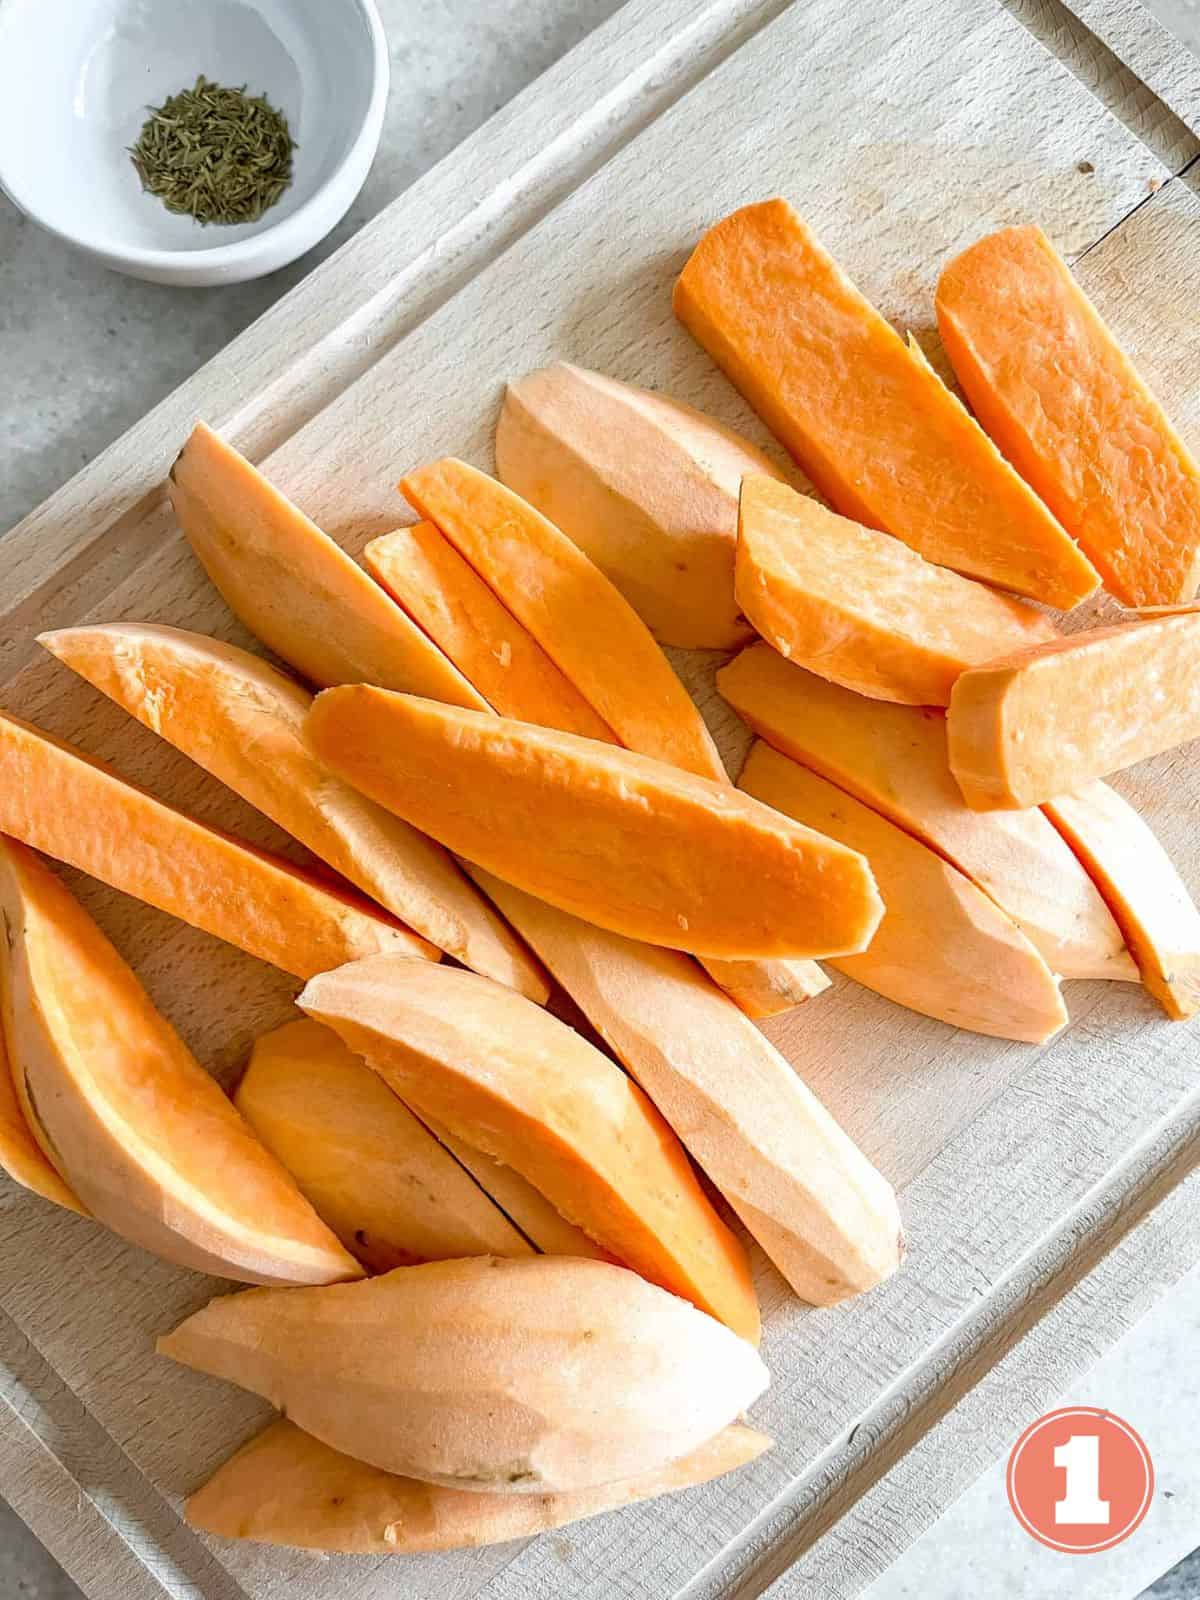 peeled sweet potato wedges on a wooden board next to a bowl of thyme labelled number one.